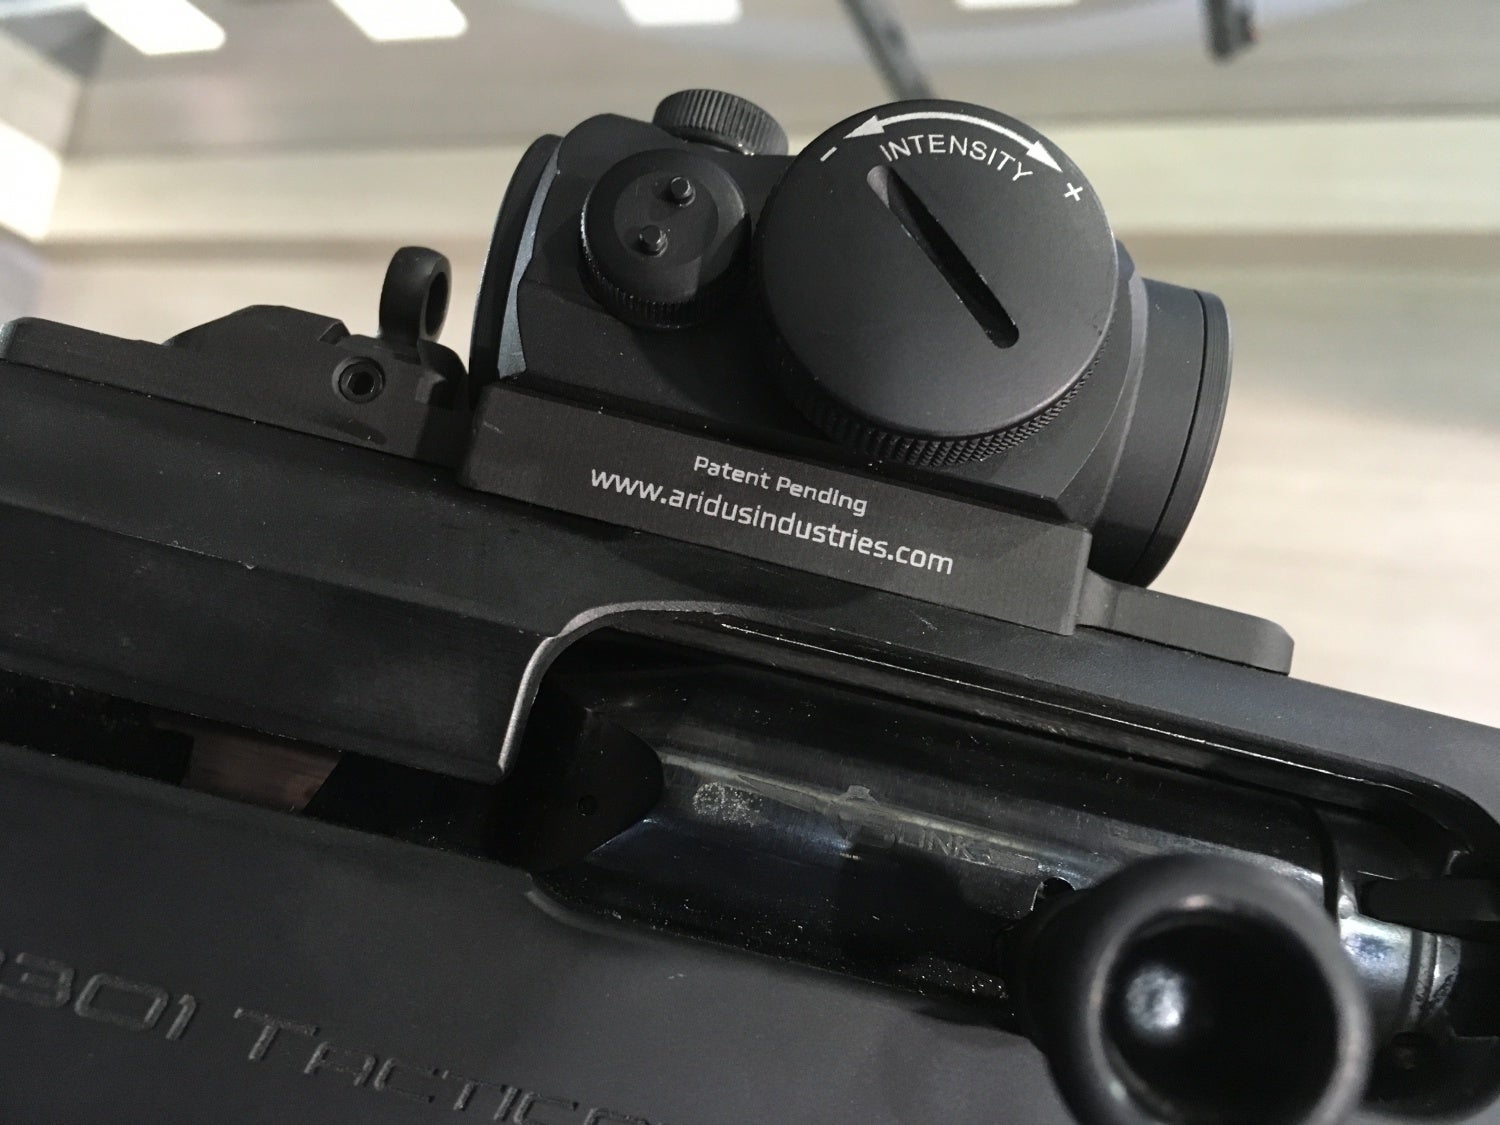 At the Beretta booth, I saw a Beretta Tactical 1301 with a distinct optic m...